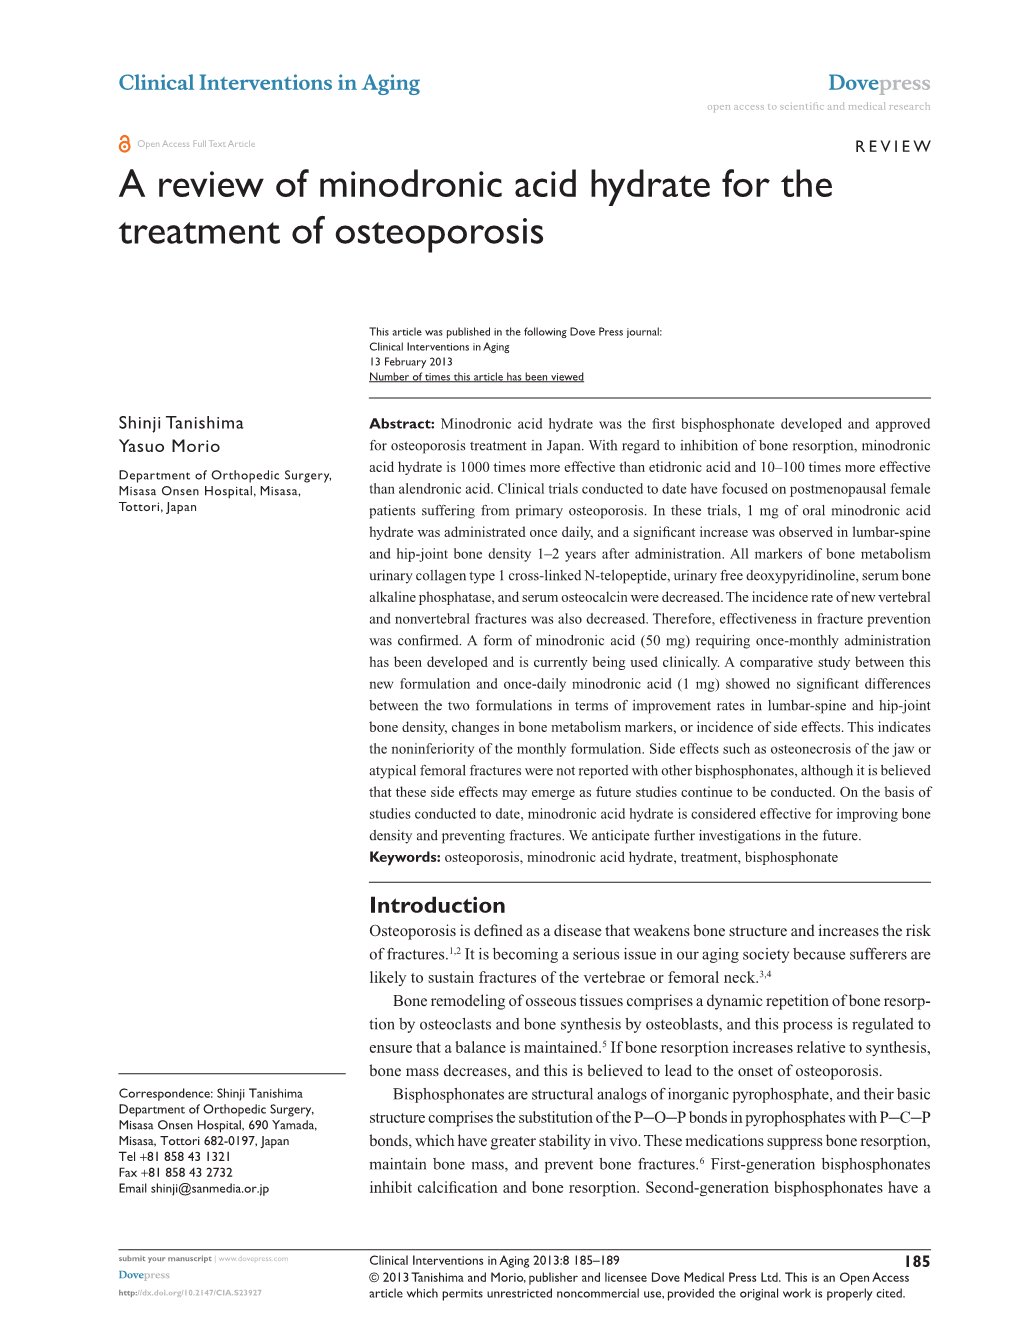 A Review of Minodronic Acid Hydrate for the Treatment of Osteoporosis